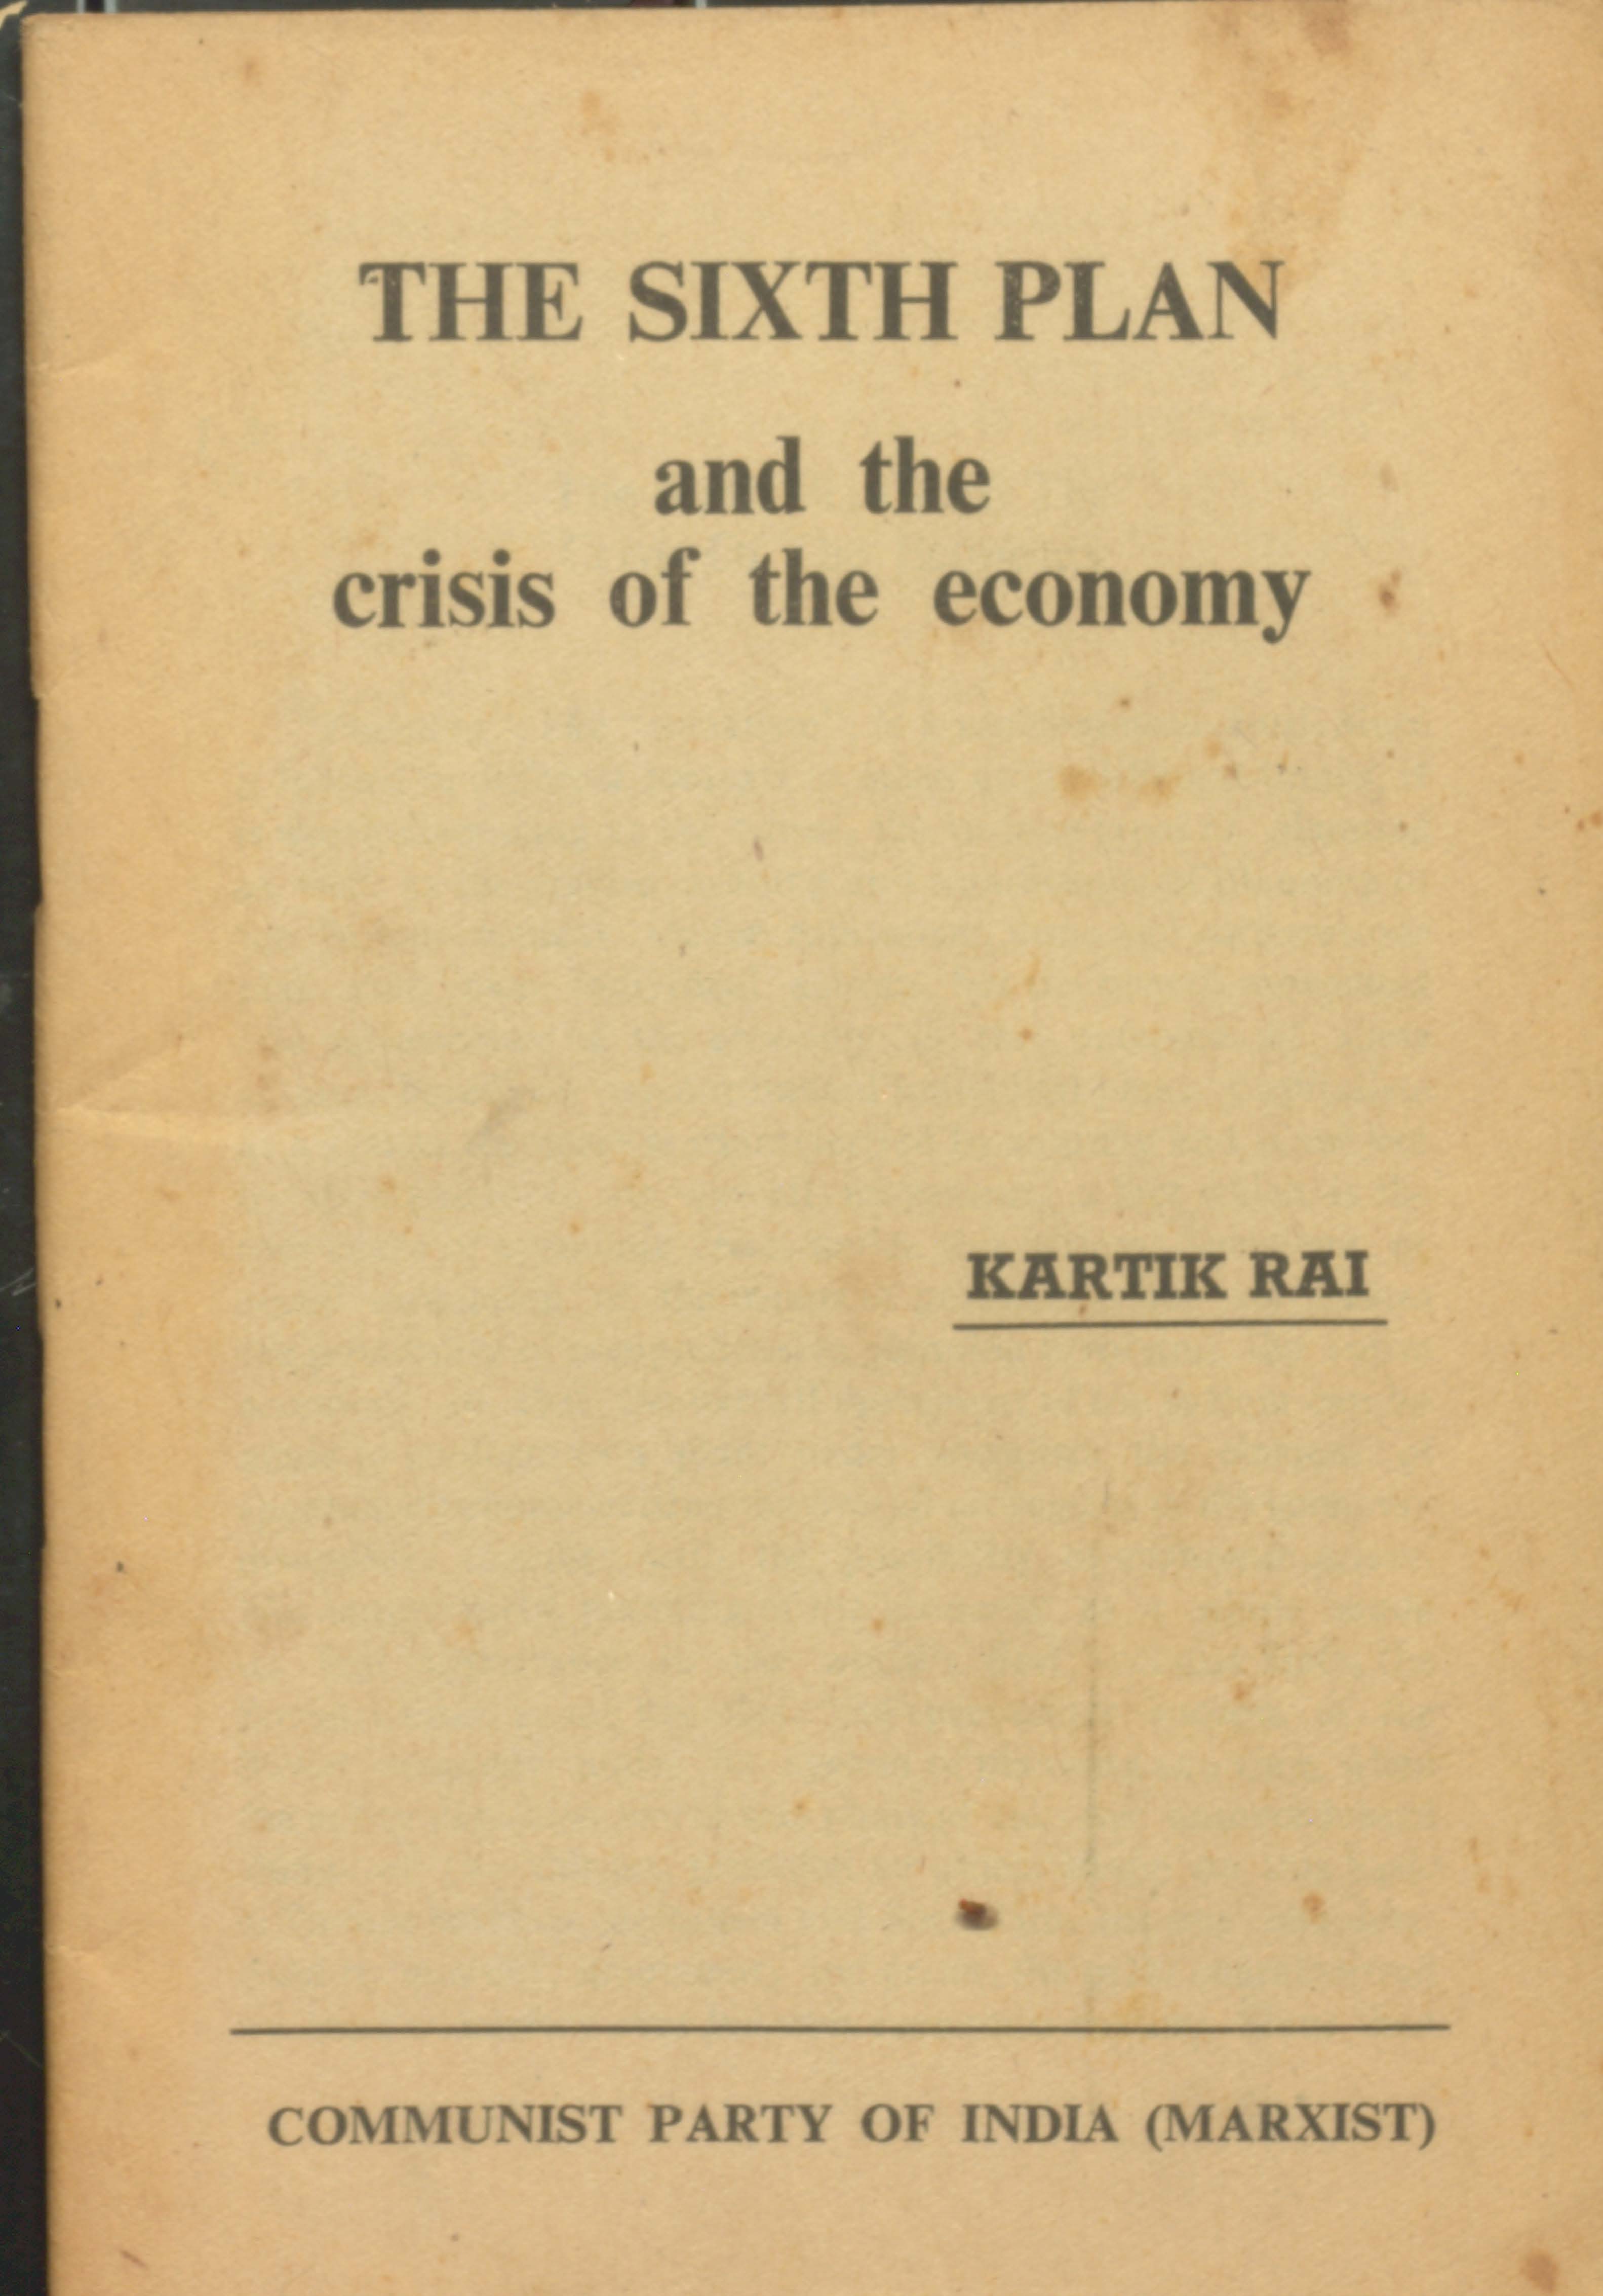 The 6th Plan and the crisis of the economy